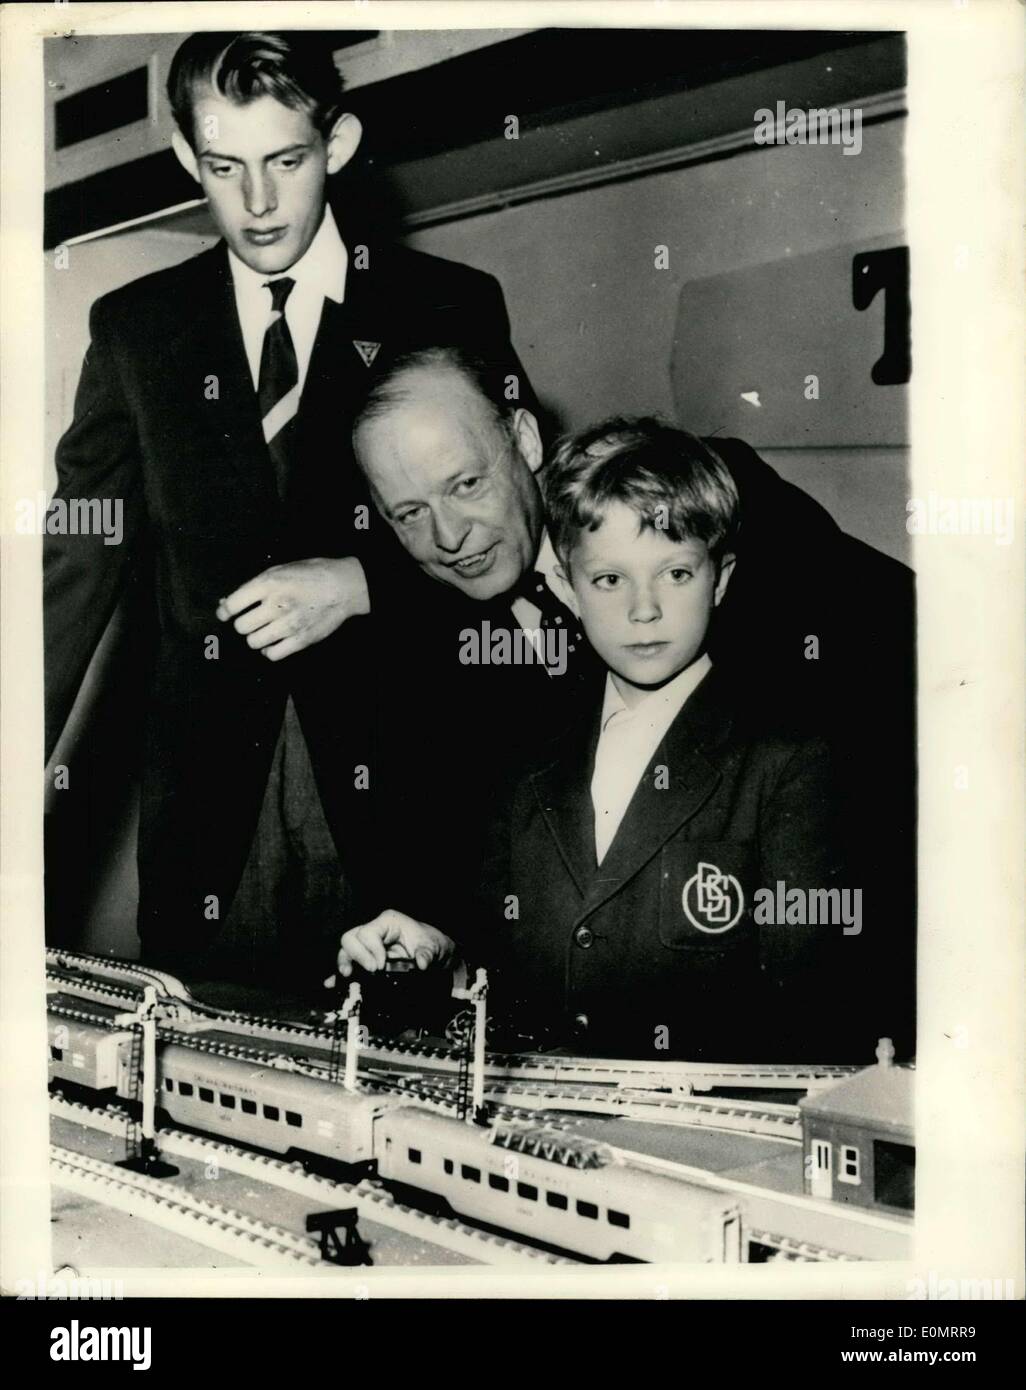 Jun. 06, 1956 - Crown Prience Carl Gustaf visits British Toy Exhibition in Stockholm: The young crown prince Carl Gustaf was the guest of honour - at the exhibition of toys - organised by the British Toy Manufacturers Lines Brothers - in Stockholm, recently. Photo shows: Sir Robert Haney and British ambassador with crowed prince call gustaf - at the exhibition in Stockholm. Stock Photo